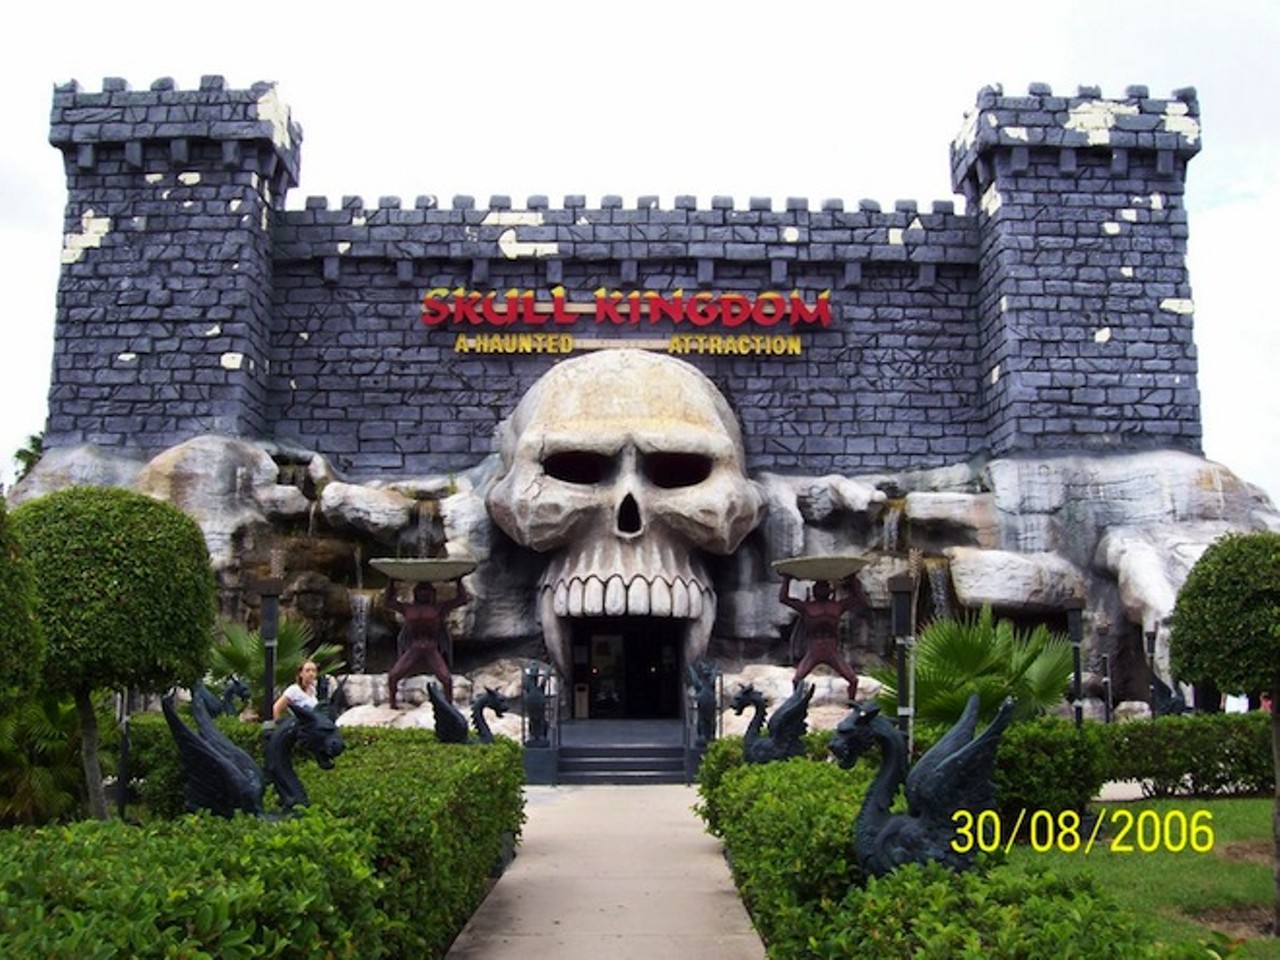 If we were super sentimental, we'd say we miss tiptoeing through the spooky castle at Skull Kingdom, but in reality, we mostly just miss seeing that imposing facade when we headed out to International Drive, which might explain a lot ...Related: Another one bites the dustImage via aragec.com